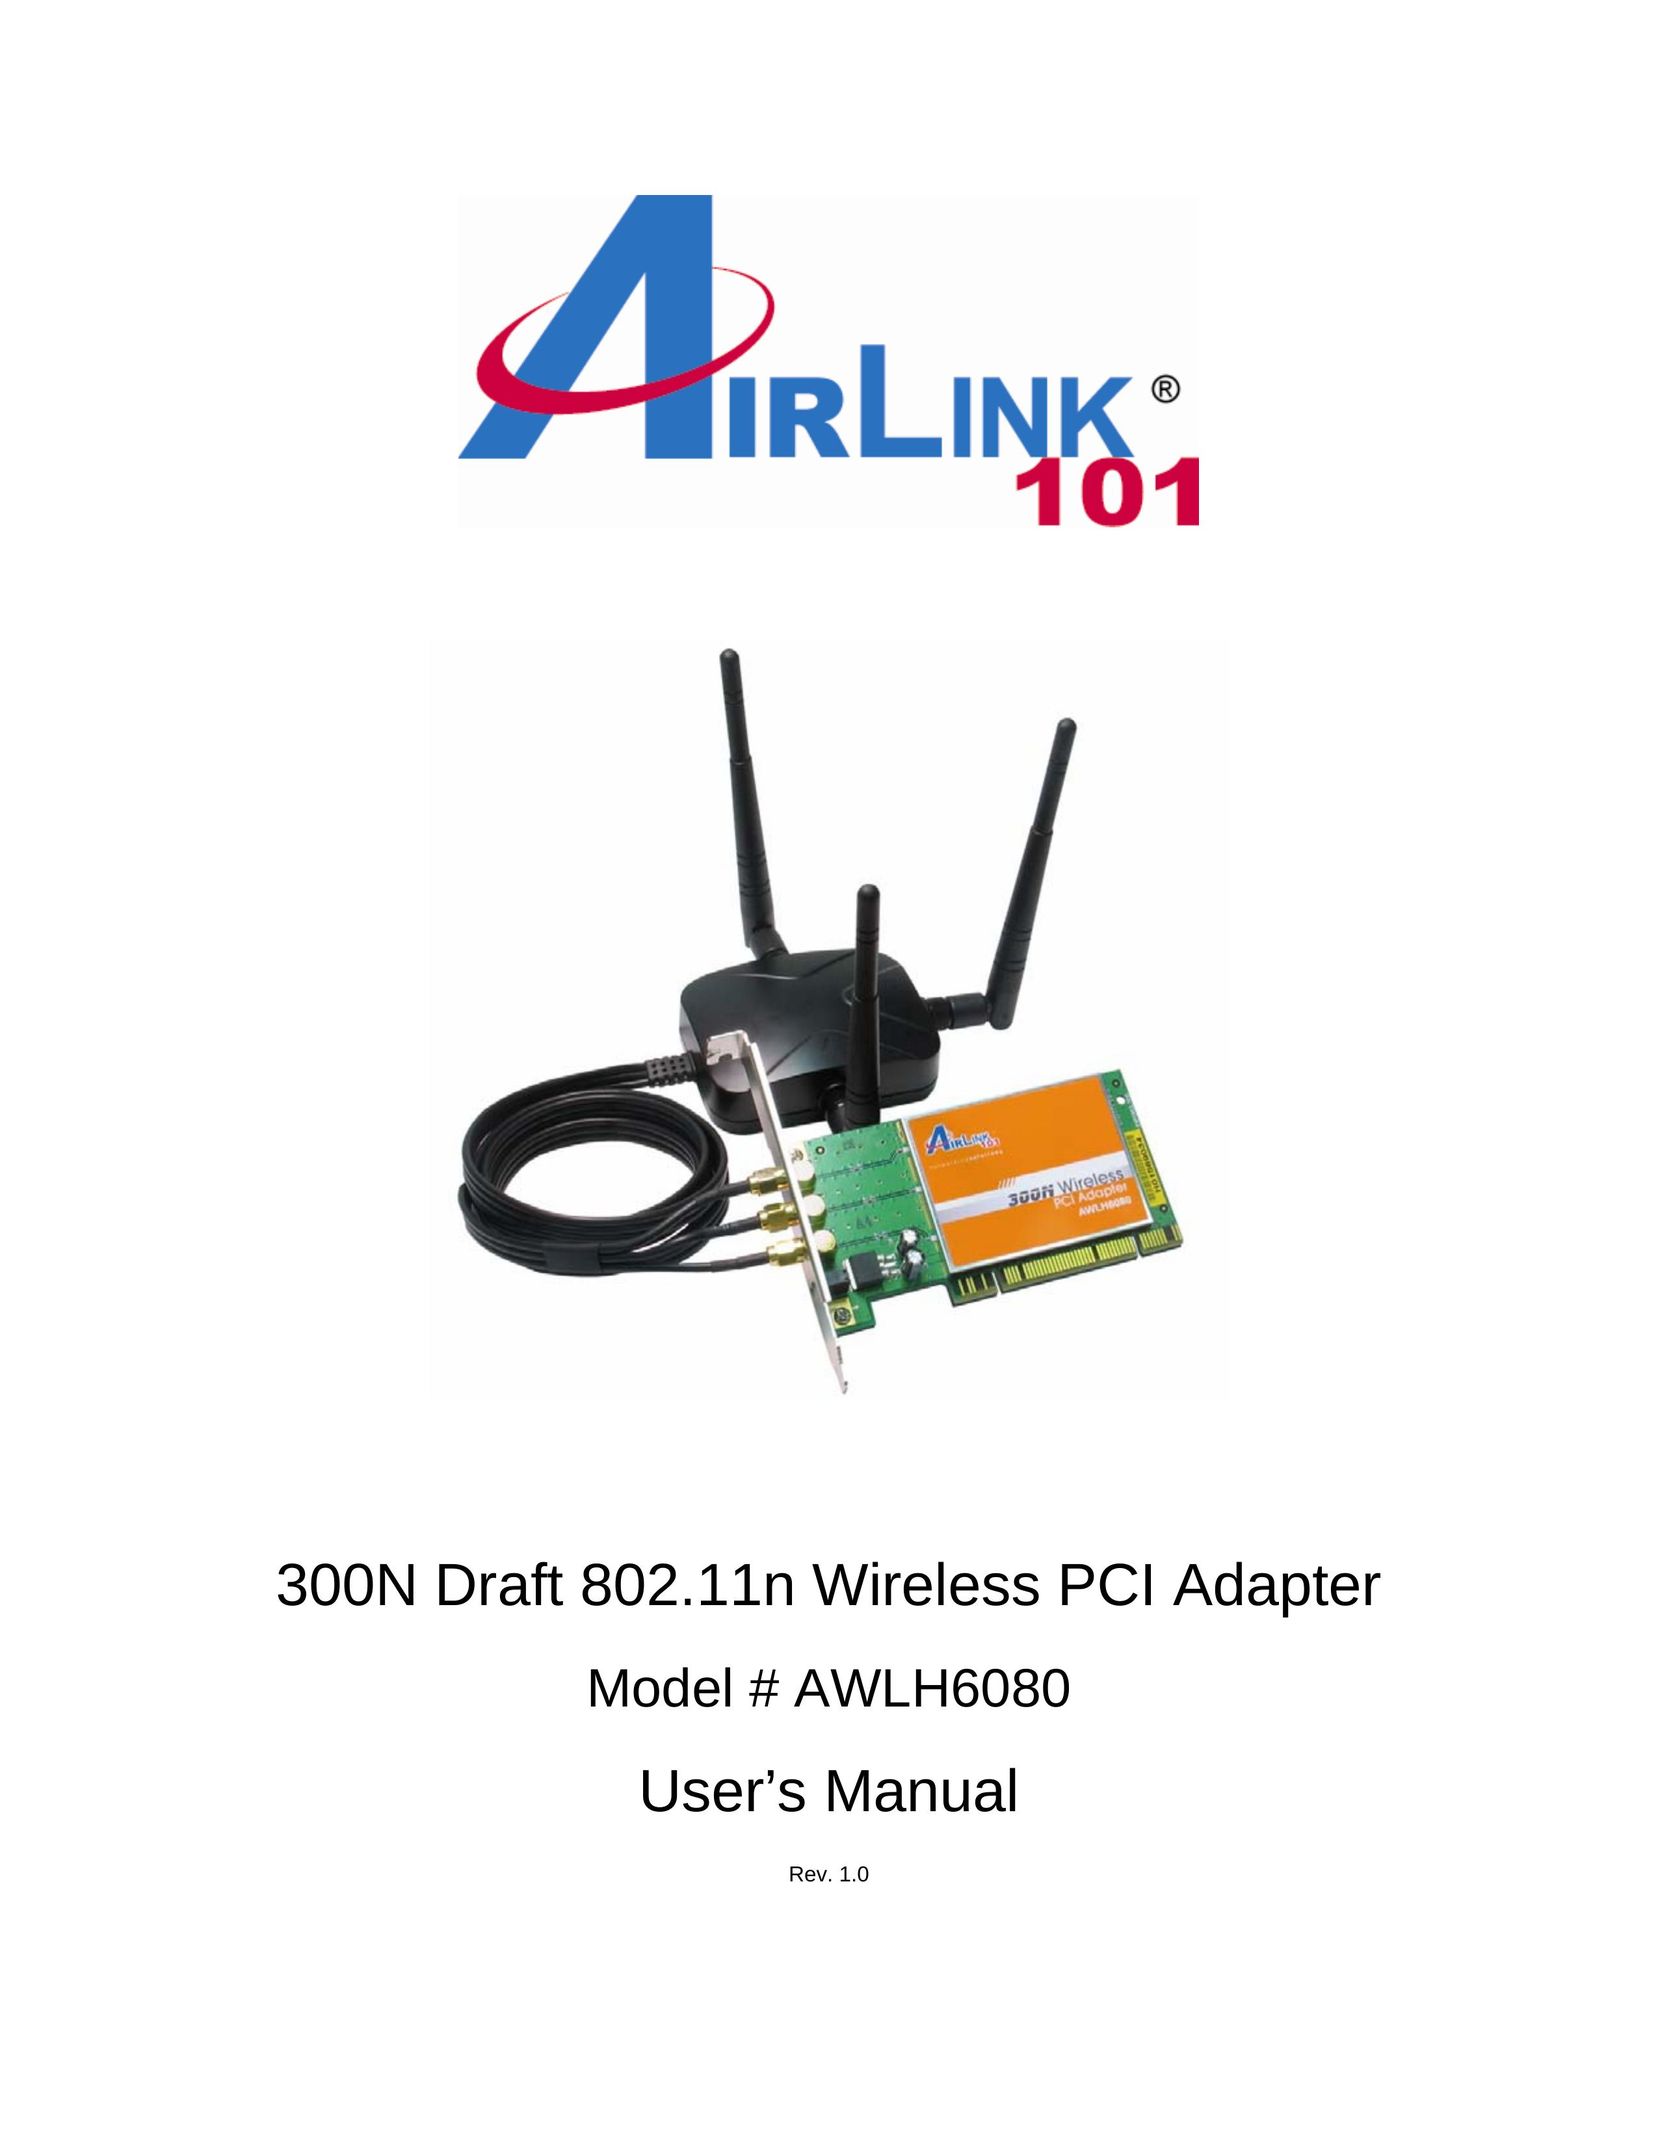 Airlink101 AWLH6080 Network Card User Manual